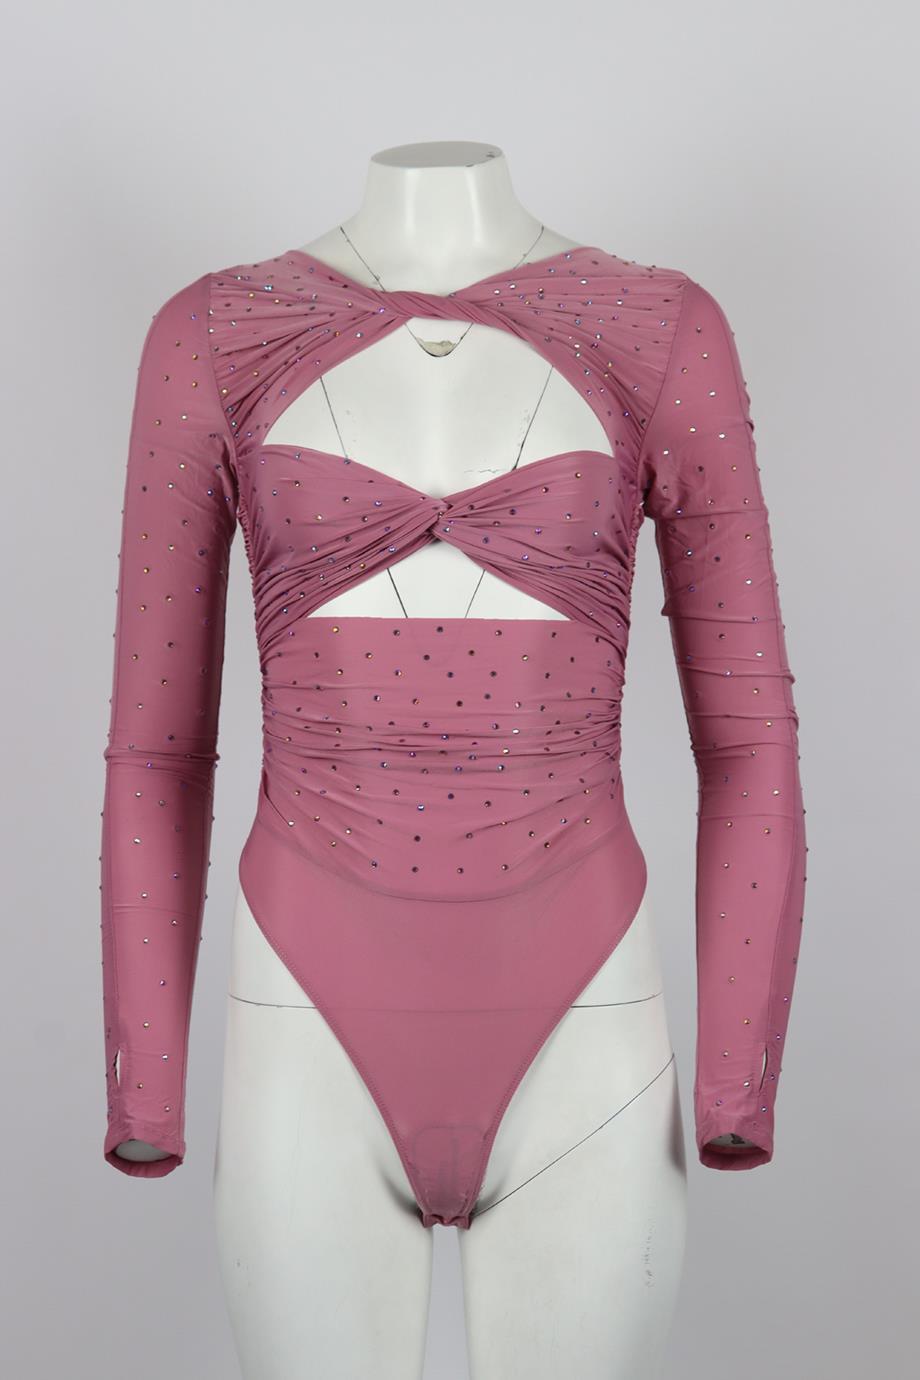 Alex Perry embellished cutout stretch jersey bodysuit. Pink. Long sleeve, crewneck. Zip fastening at back. 87% Nylon, 13% elastane. Size: UK 6 (US 2, FR 34, IT 38). Bust: 20.3 in. Waist: 18 in. Hips: 21.2 in. Length: 24.2 in. New with tags